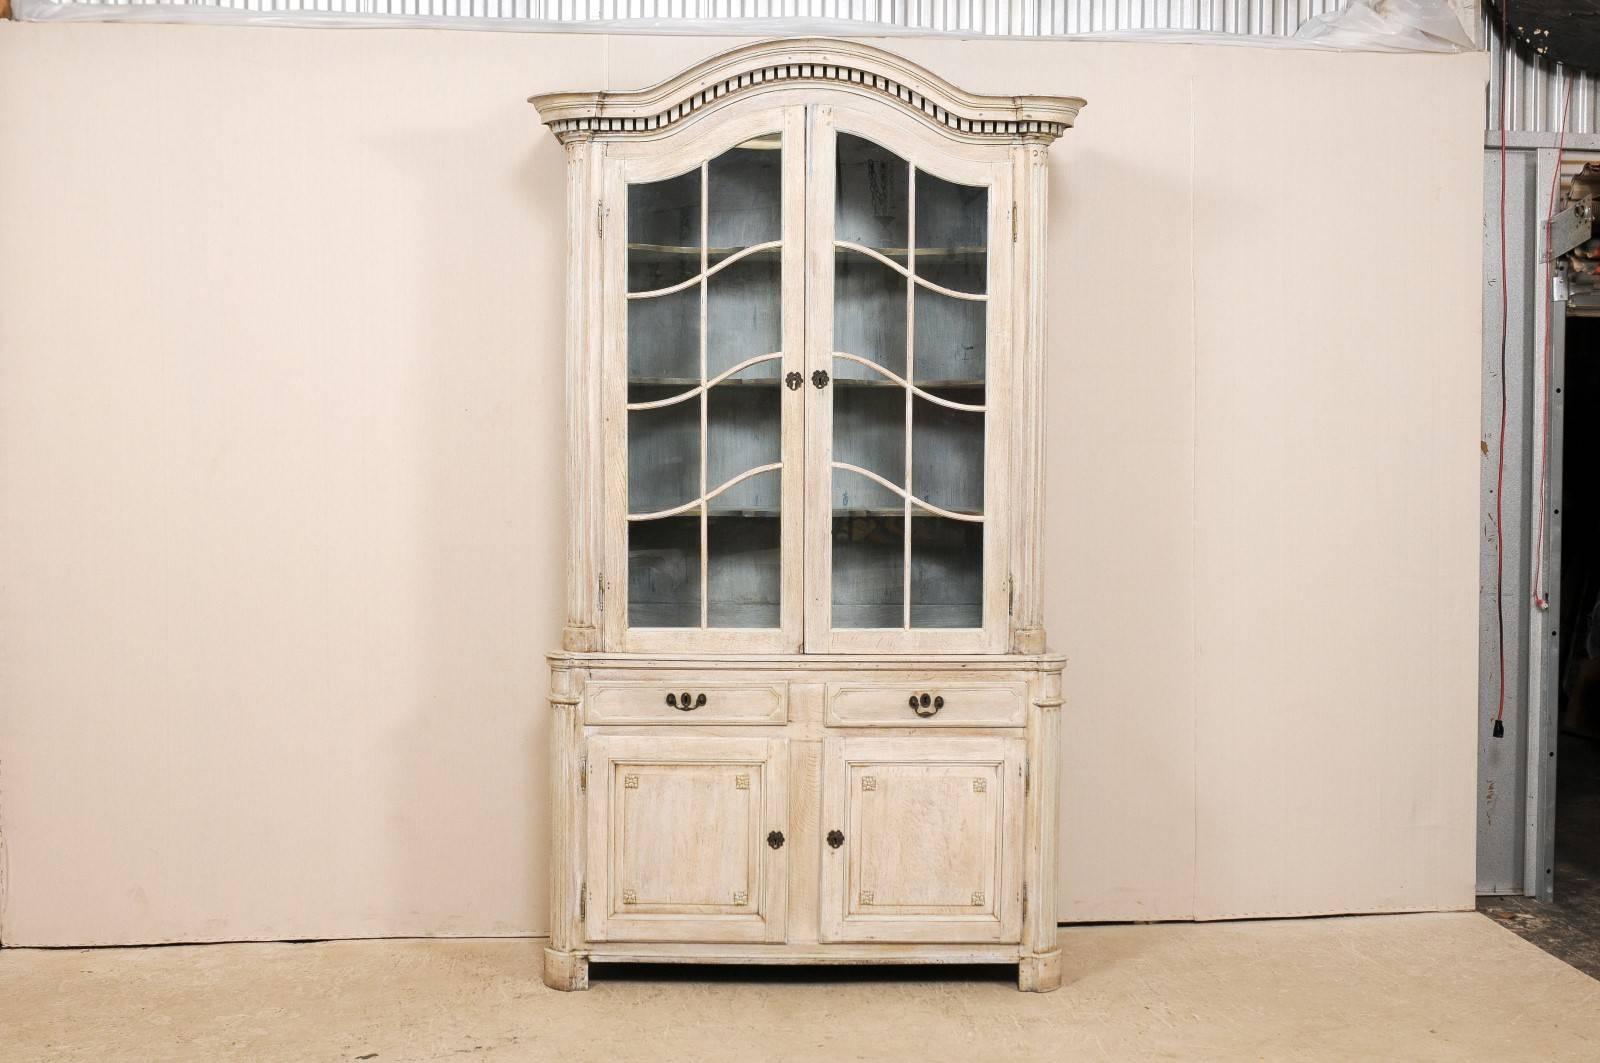 A mid-19th century French cabinet. This tall French cabinet has two upper glass front doors with shelves inside. The lower half of this cabinet has two drawers followed by two cabinet doors directly below. This piece features a bonnet type pediment